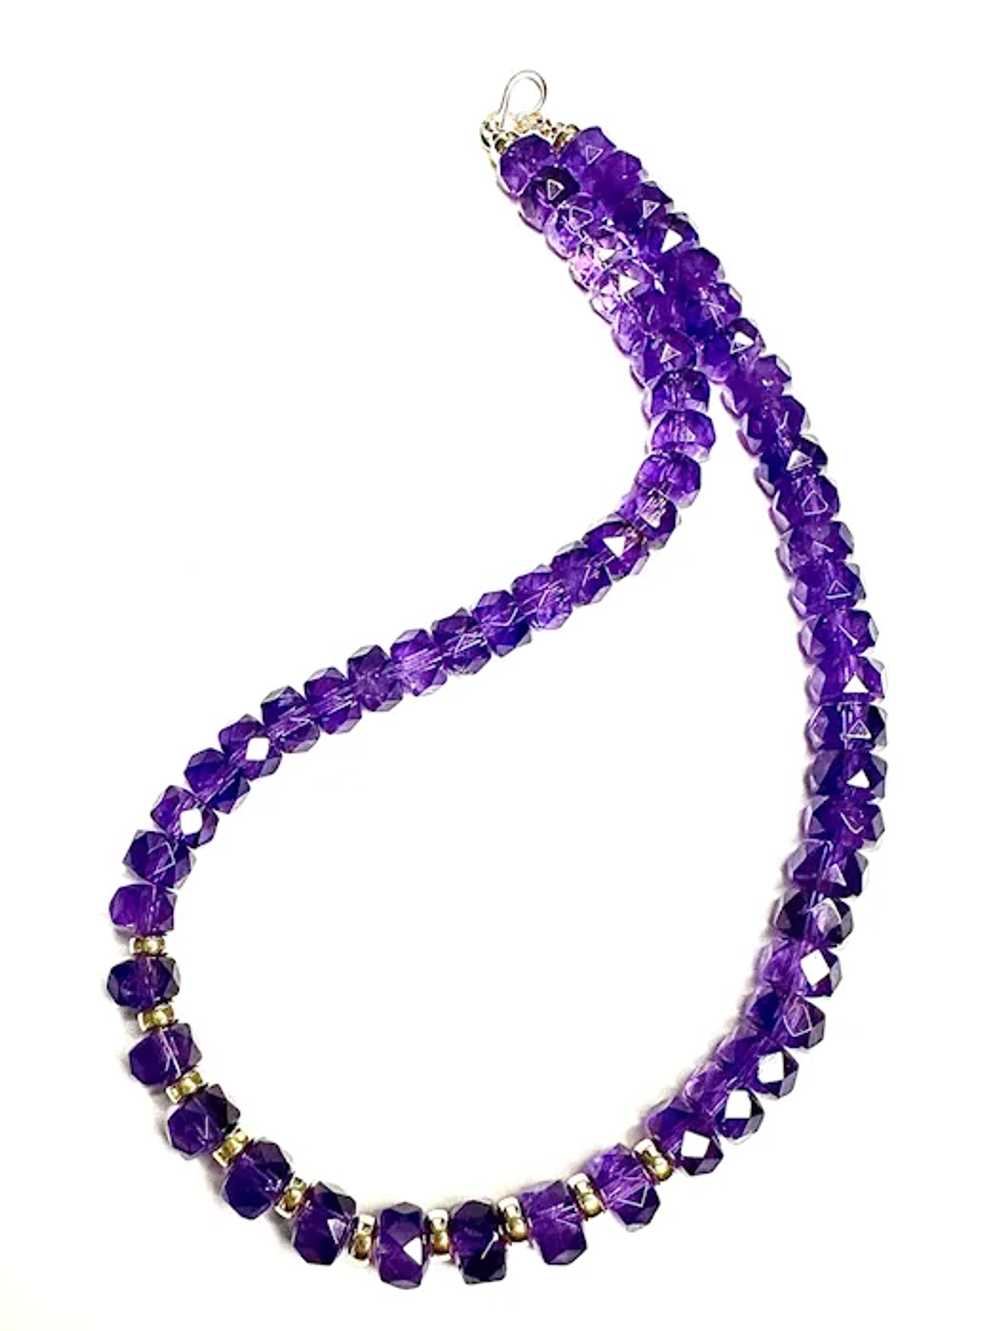 Faceted Amethyst and 14k Gold Necklace - image 2